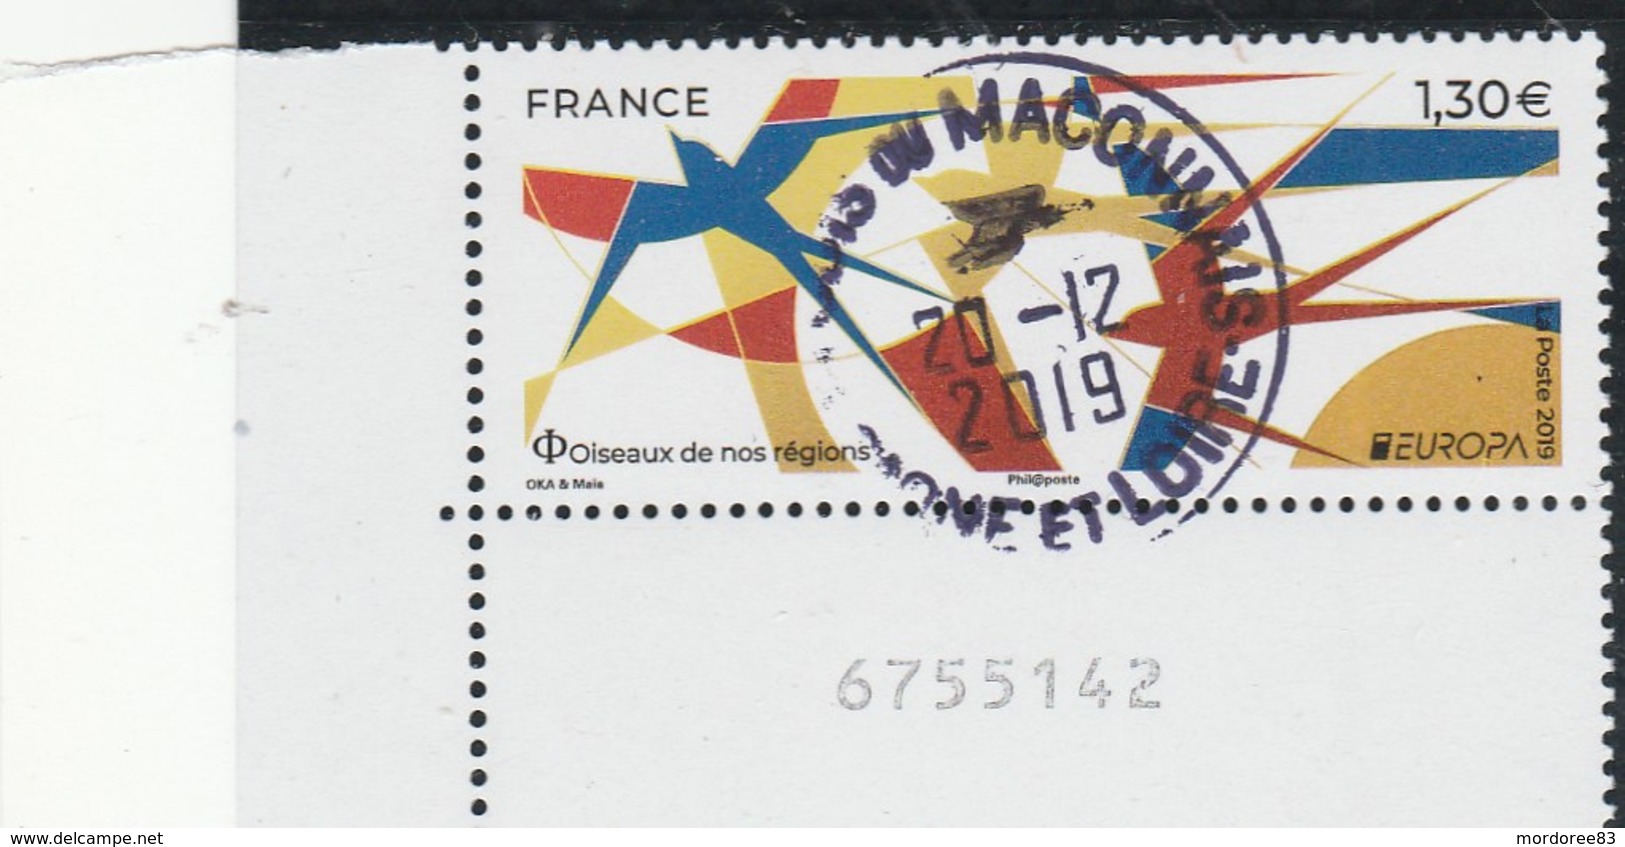 FRANCE 2019 EUROPA FAUNE OISEAUX NATIONAUX YT 5320 OBLITERE A DATE - 2010-.. Matasellados